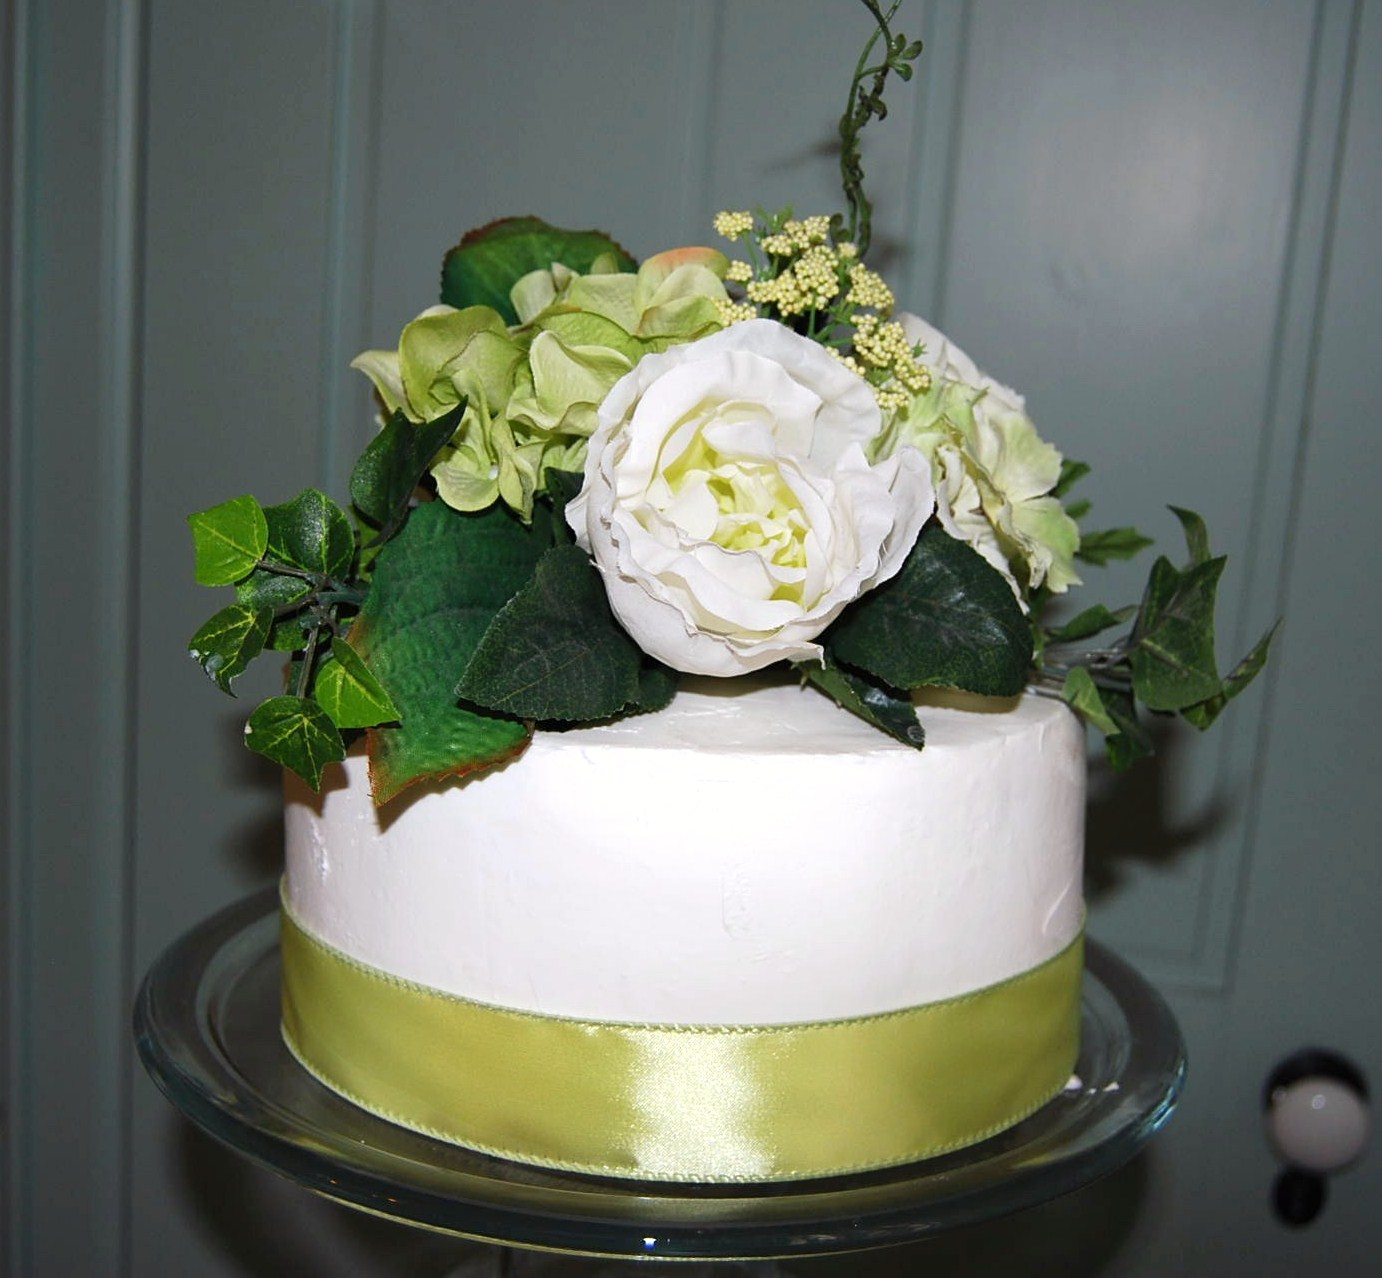 Define Your Sign How To Make A Three Tiered Wedding Cake